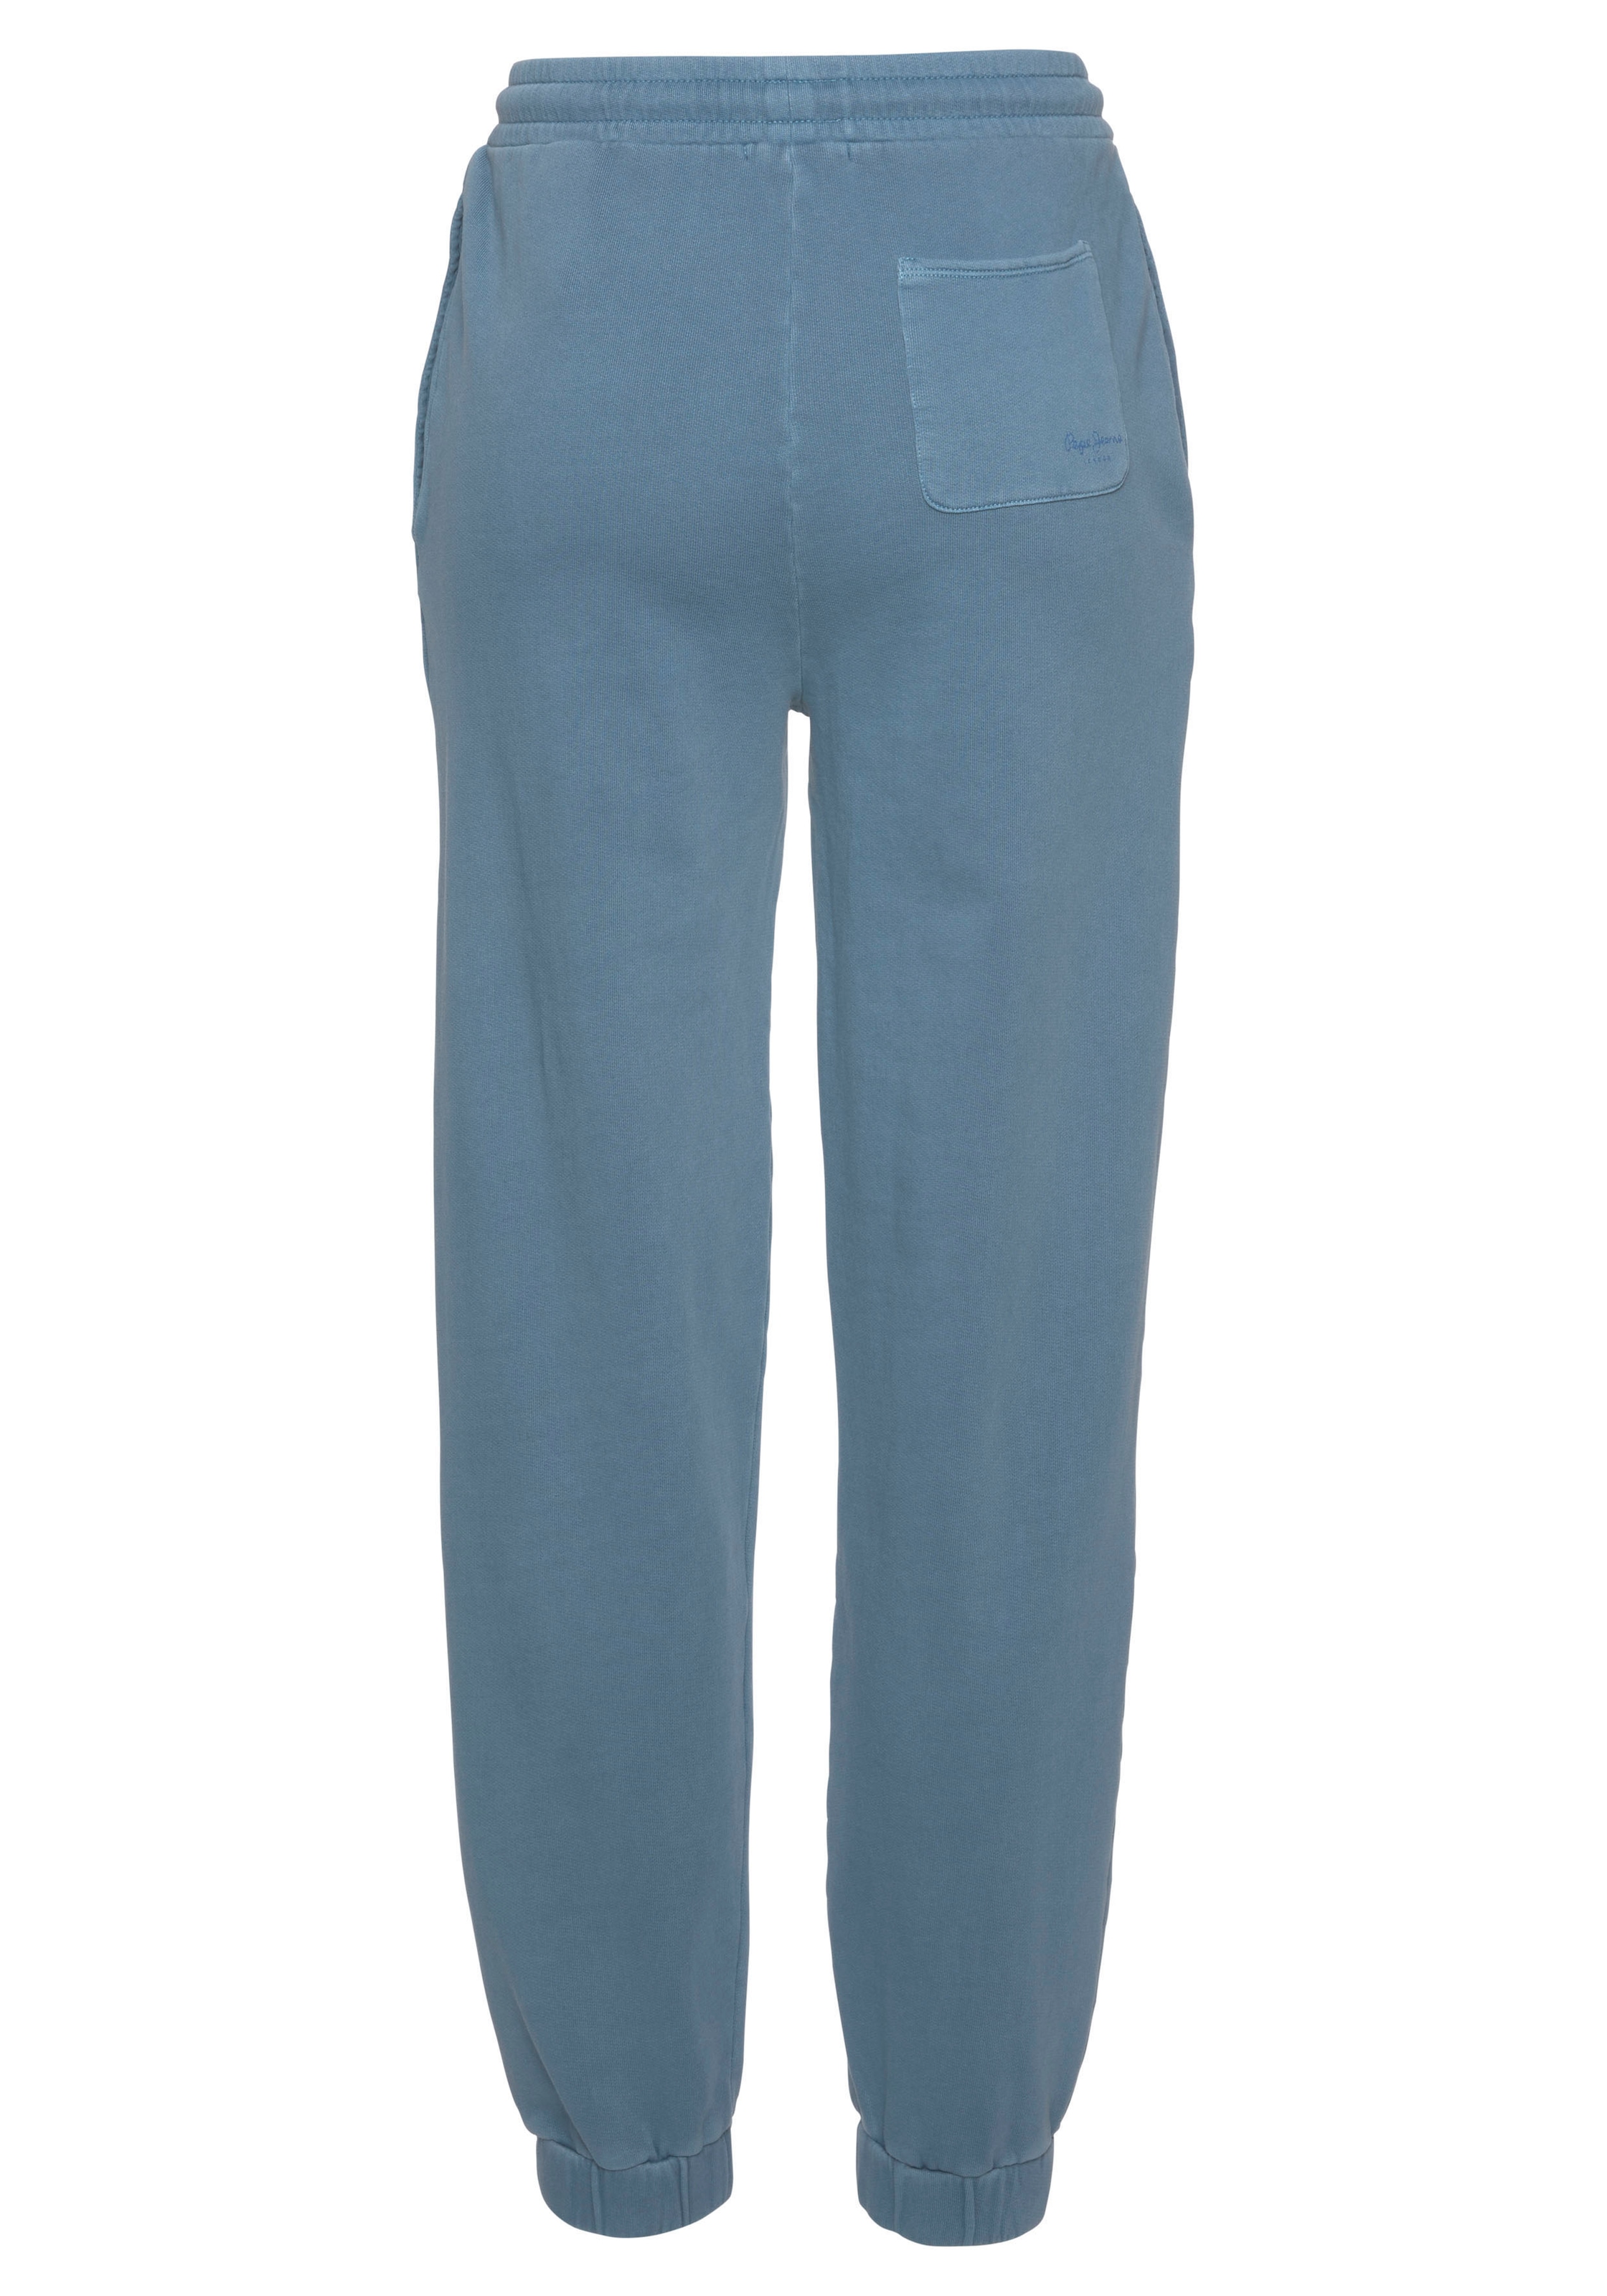 Pepe Jeans Jogger Passform »AUDREY«, entspannter mit Kordelzug in bei ♕ Pants